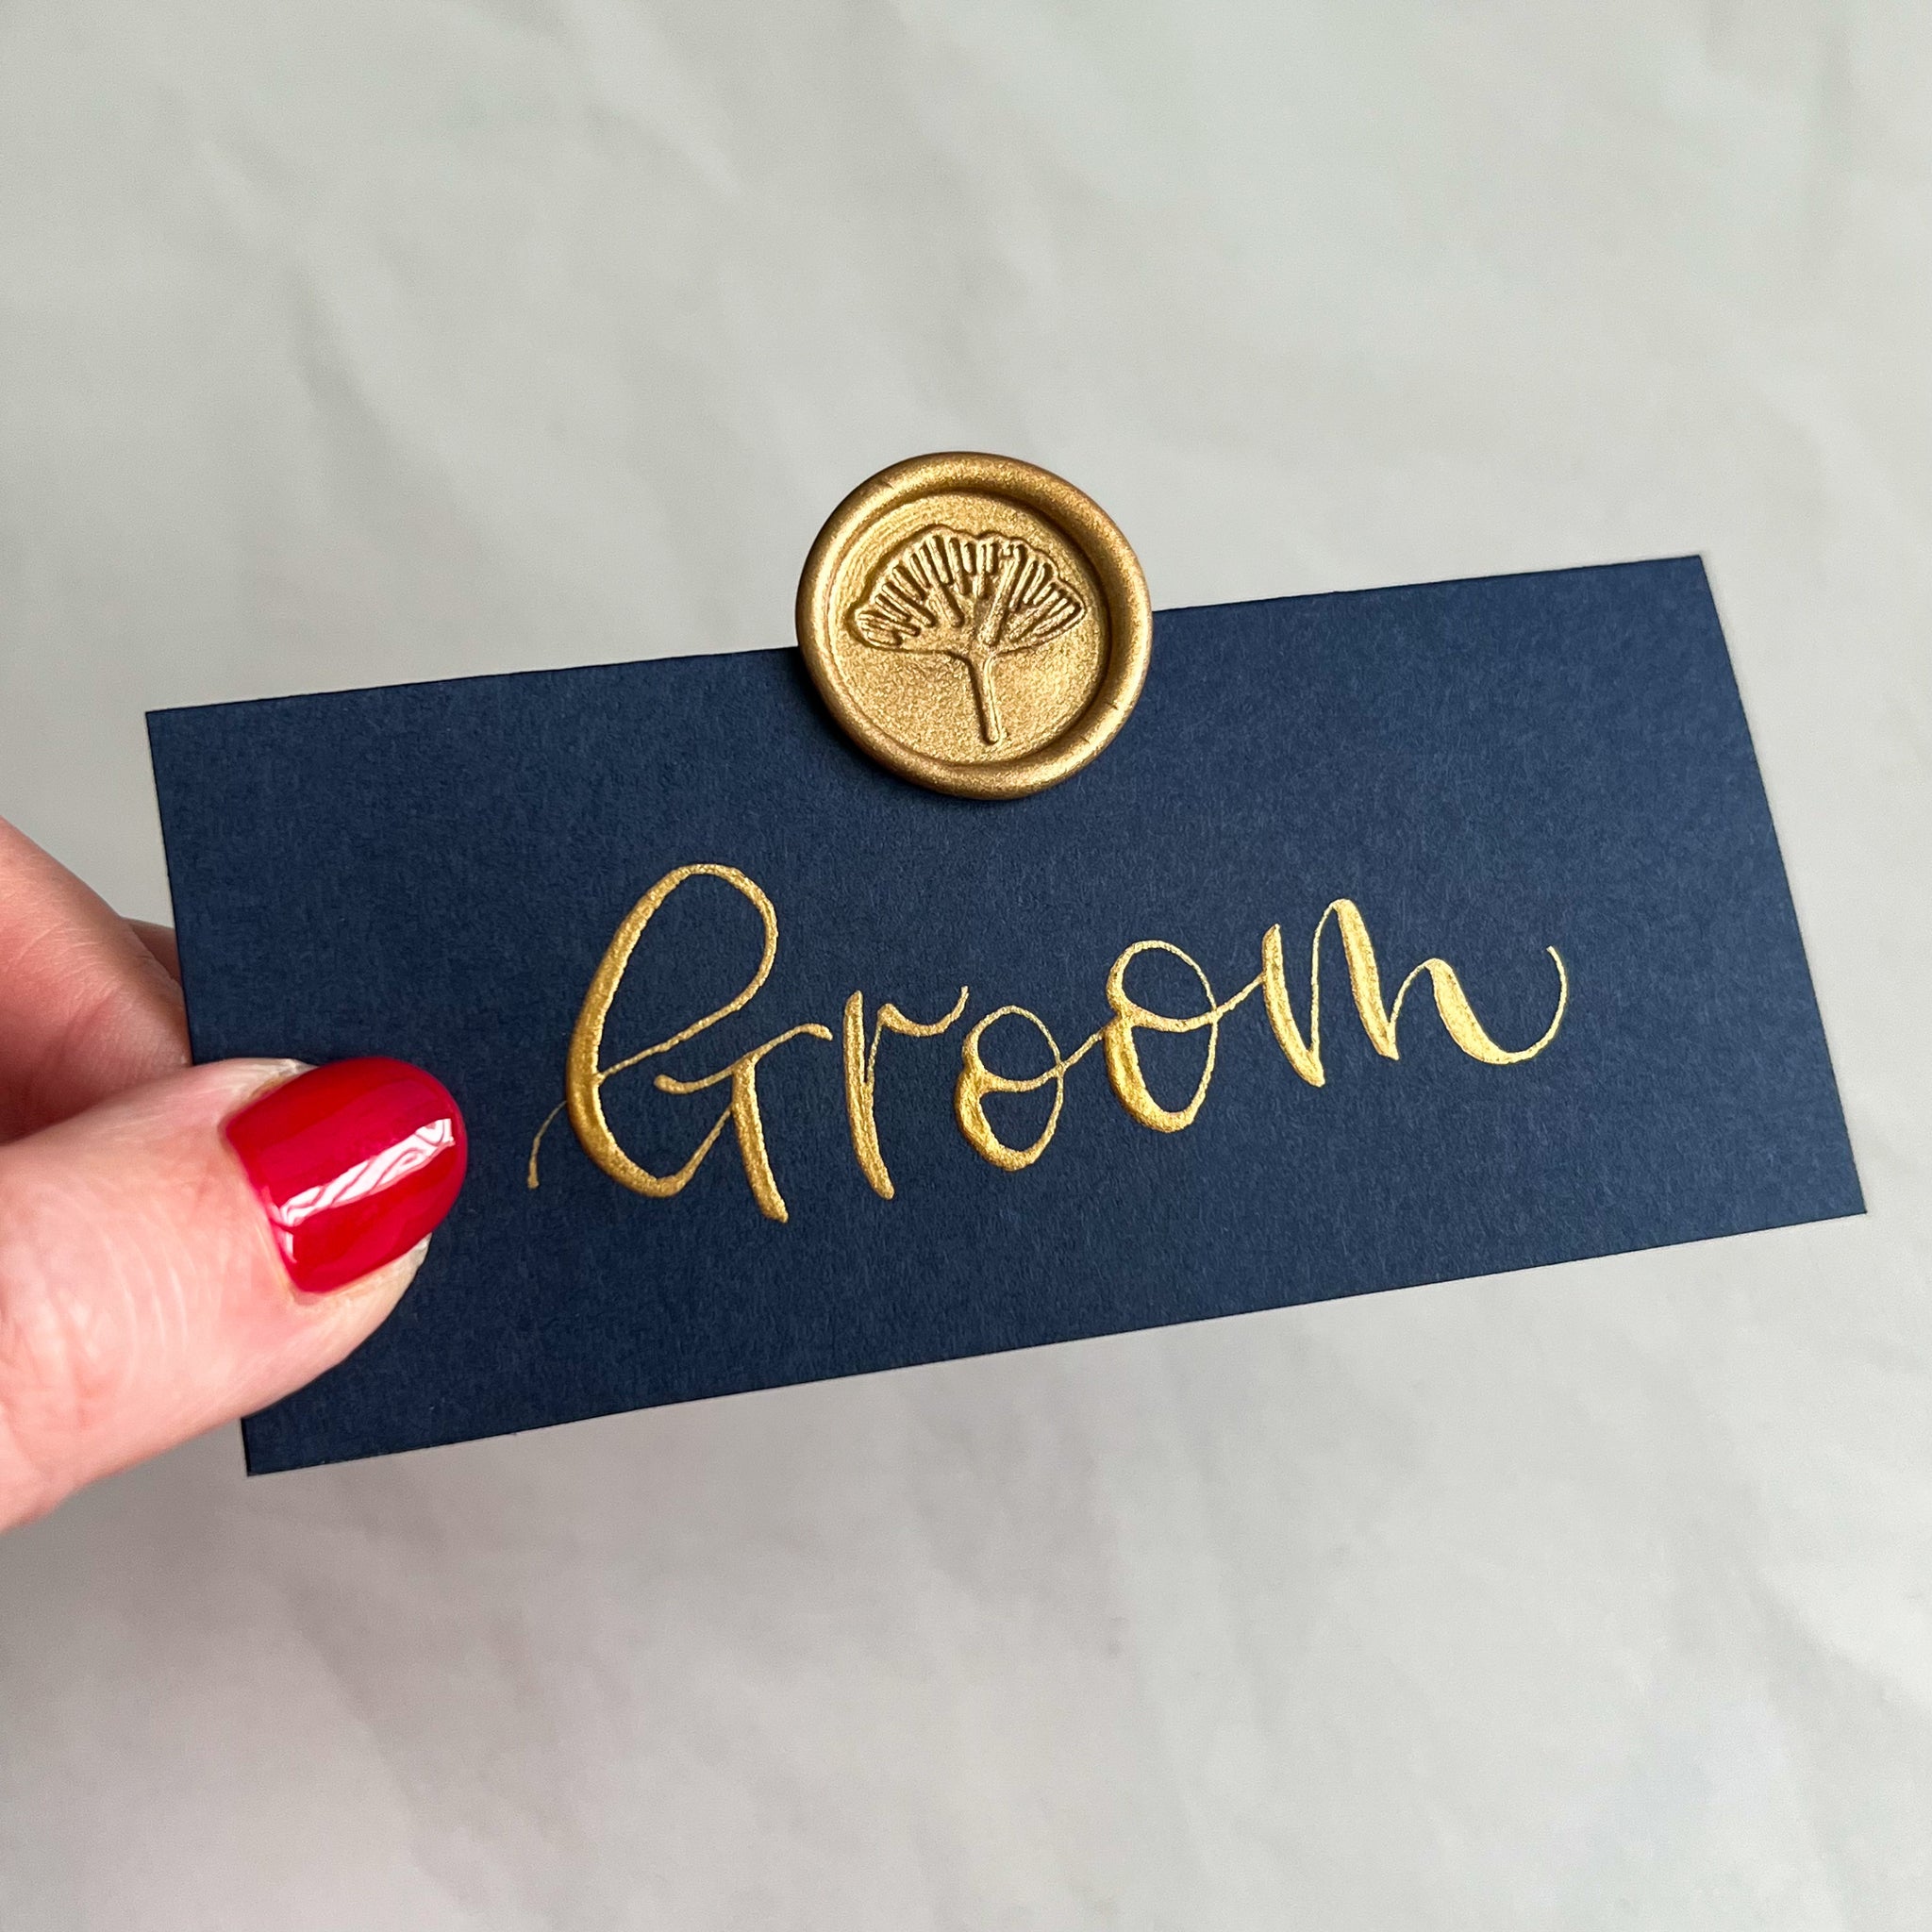 Navy place cards with wax seals